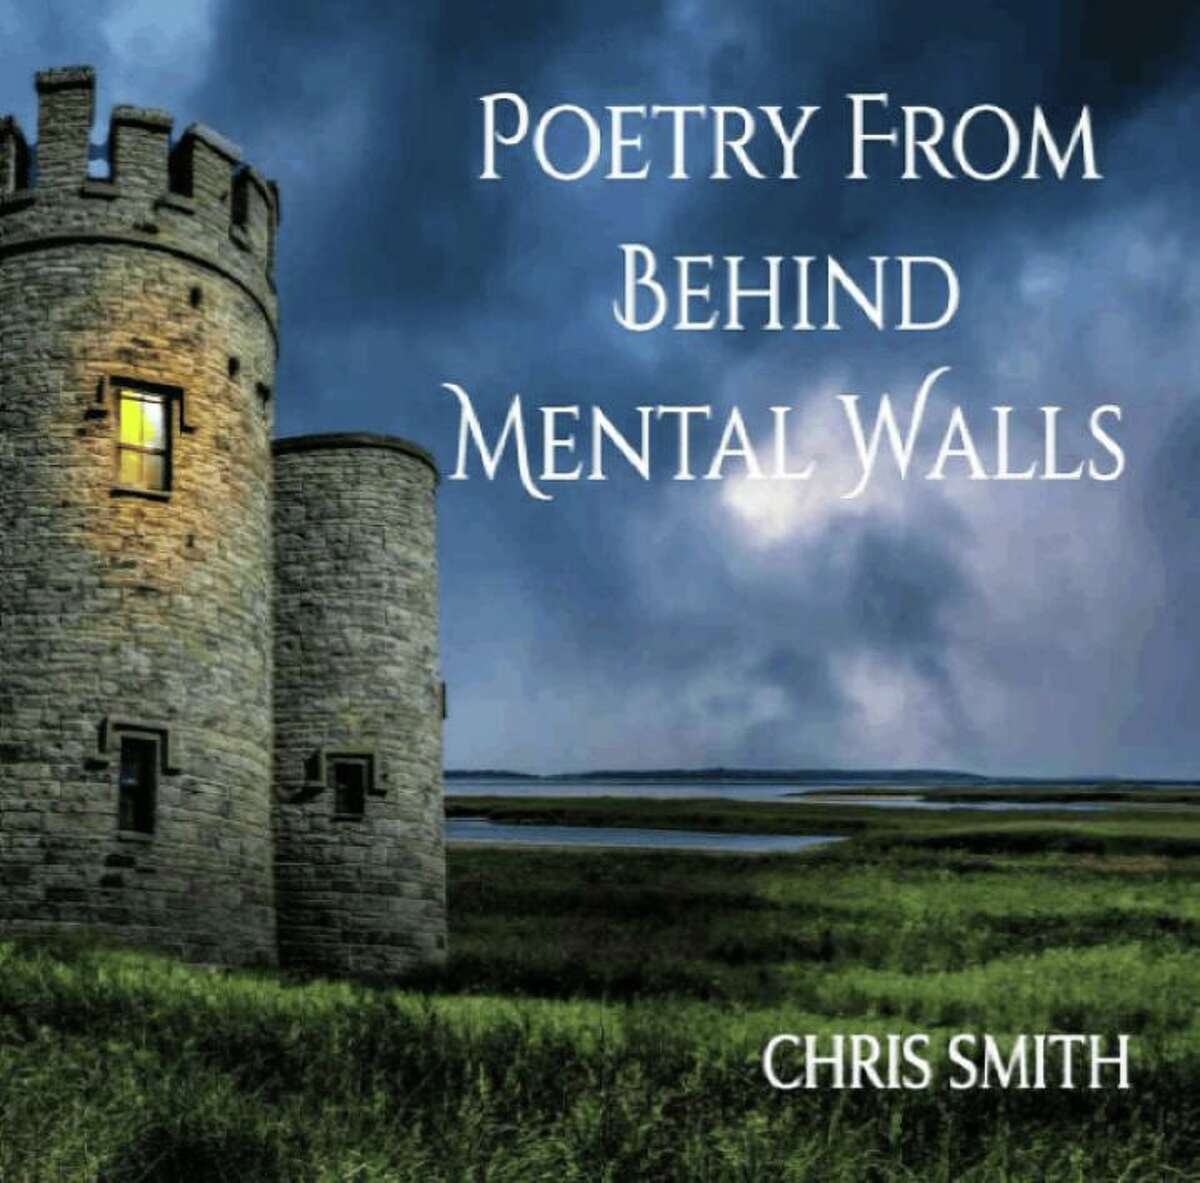 Andrew Mercado, who spent time at the Whiting Forensic Hospital in Middletown in 2019, has written a book of poems, “Poetry from Behind Mental Walls.” He writes under the pen name Chris Smith.